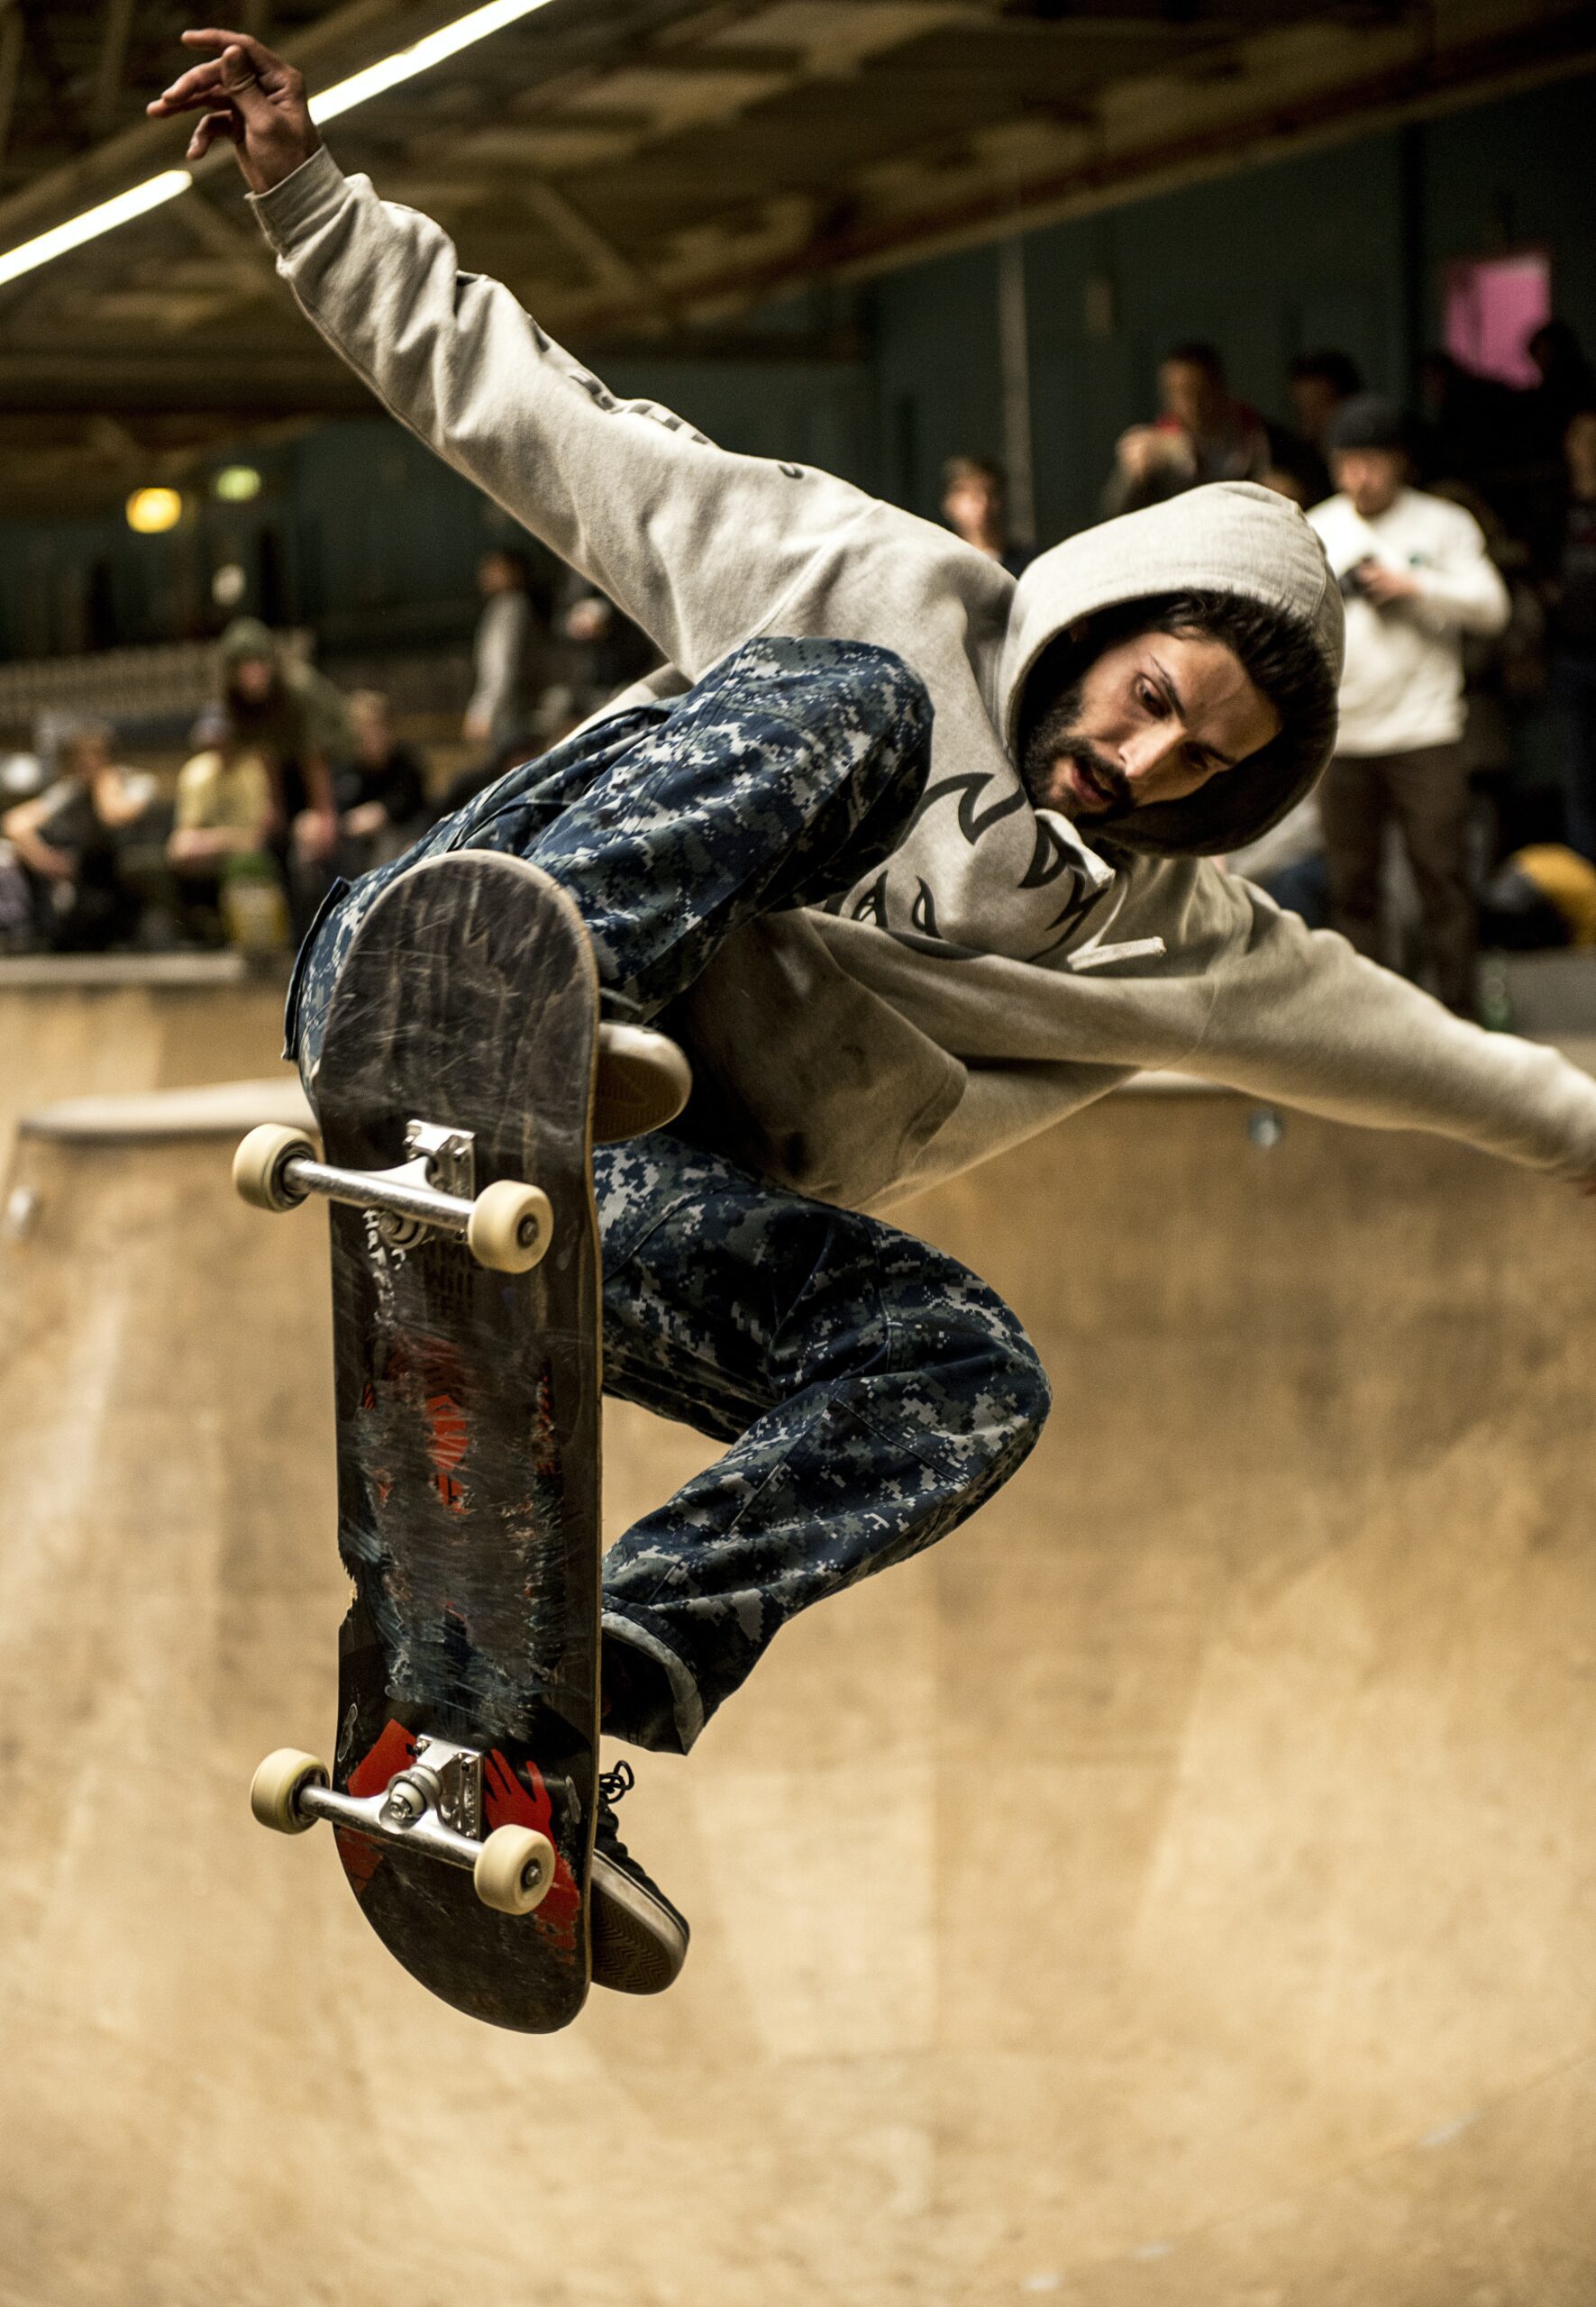 What Skateboard Wheels Are Suitable For Various Terrain And Riding Styles?